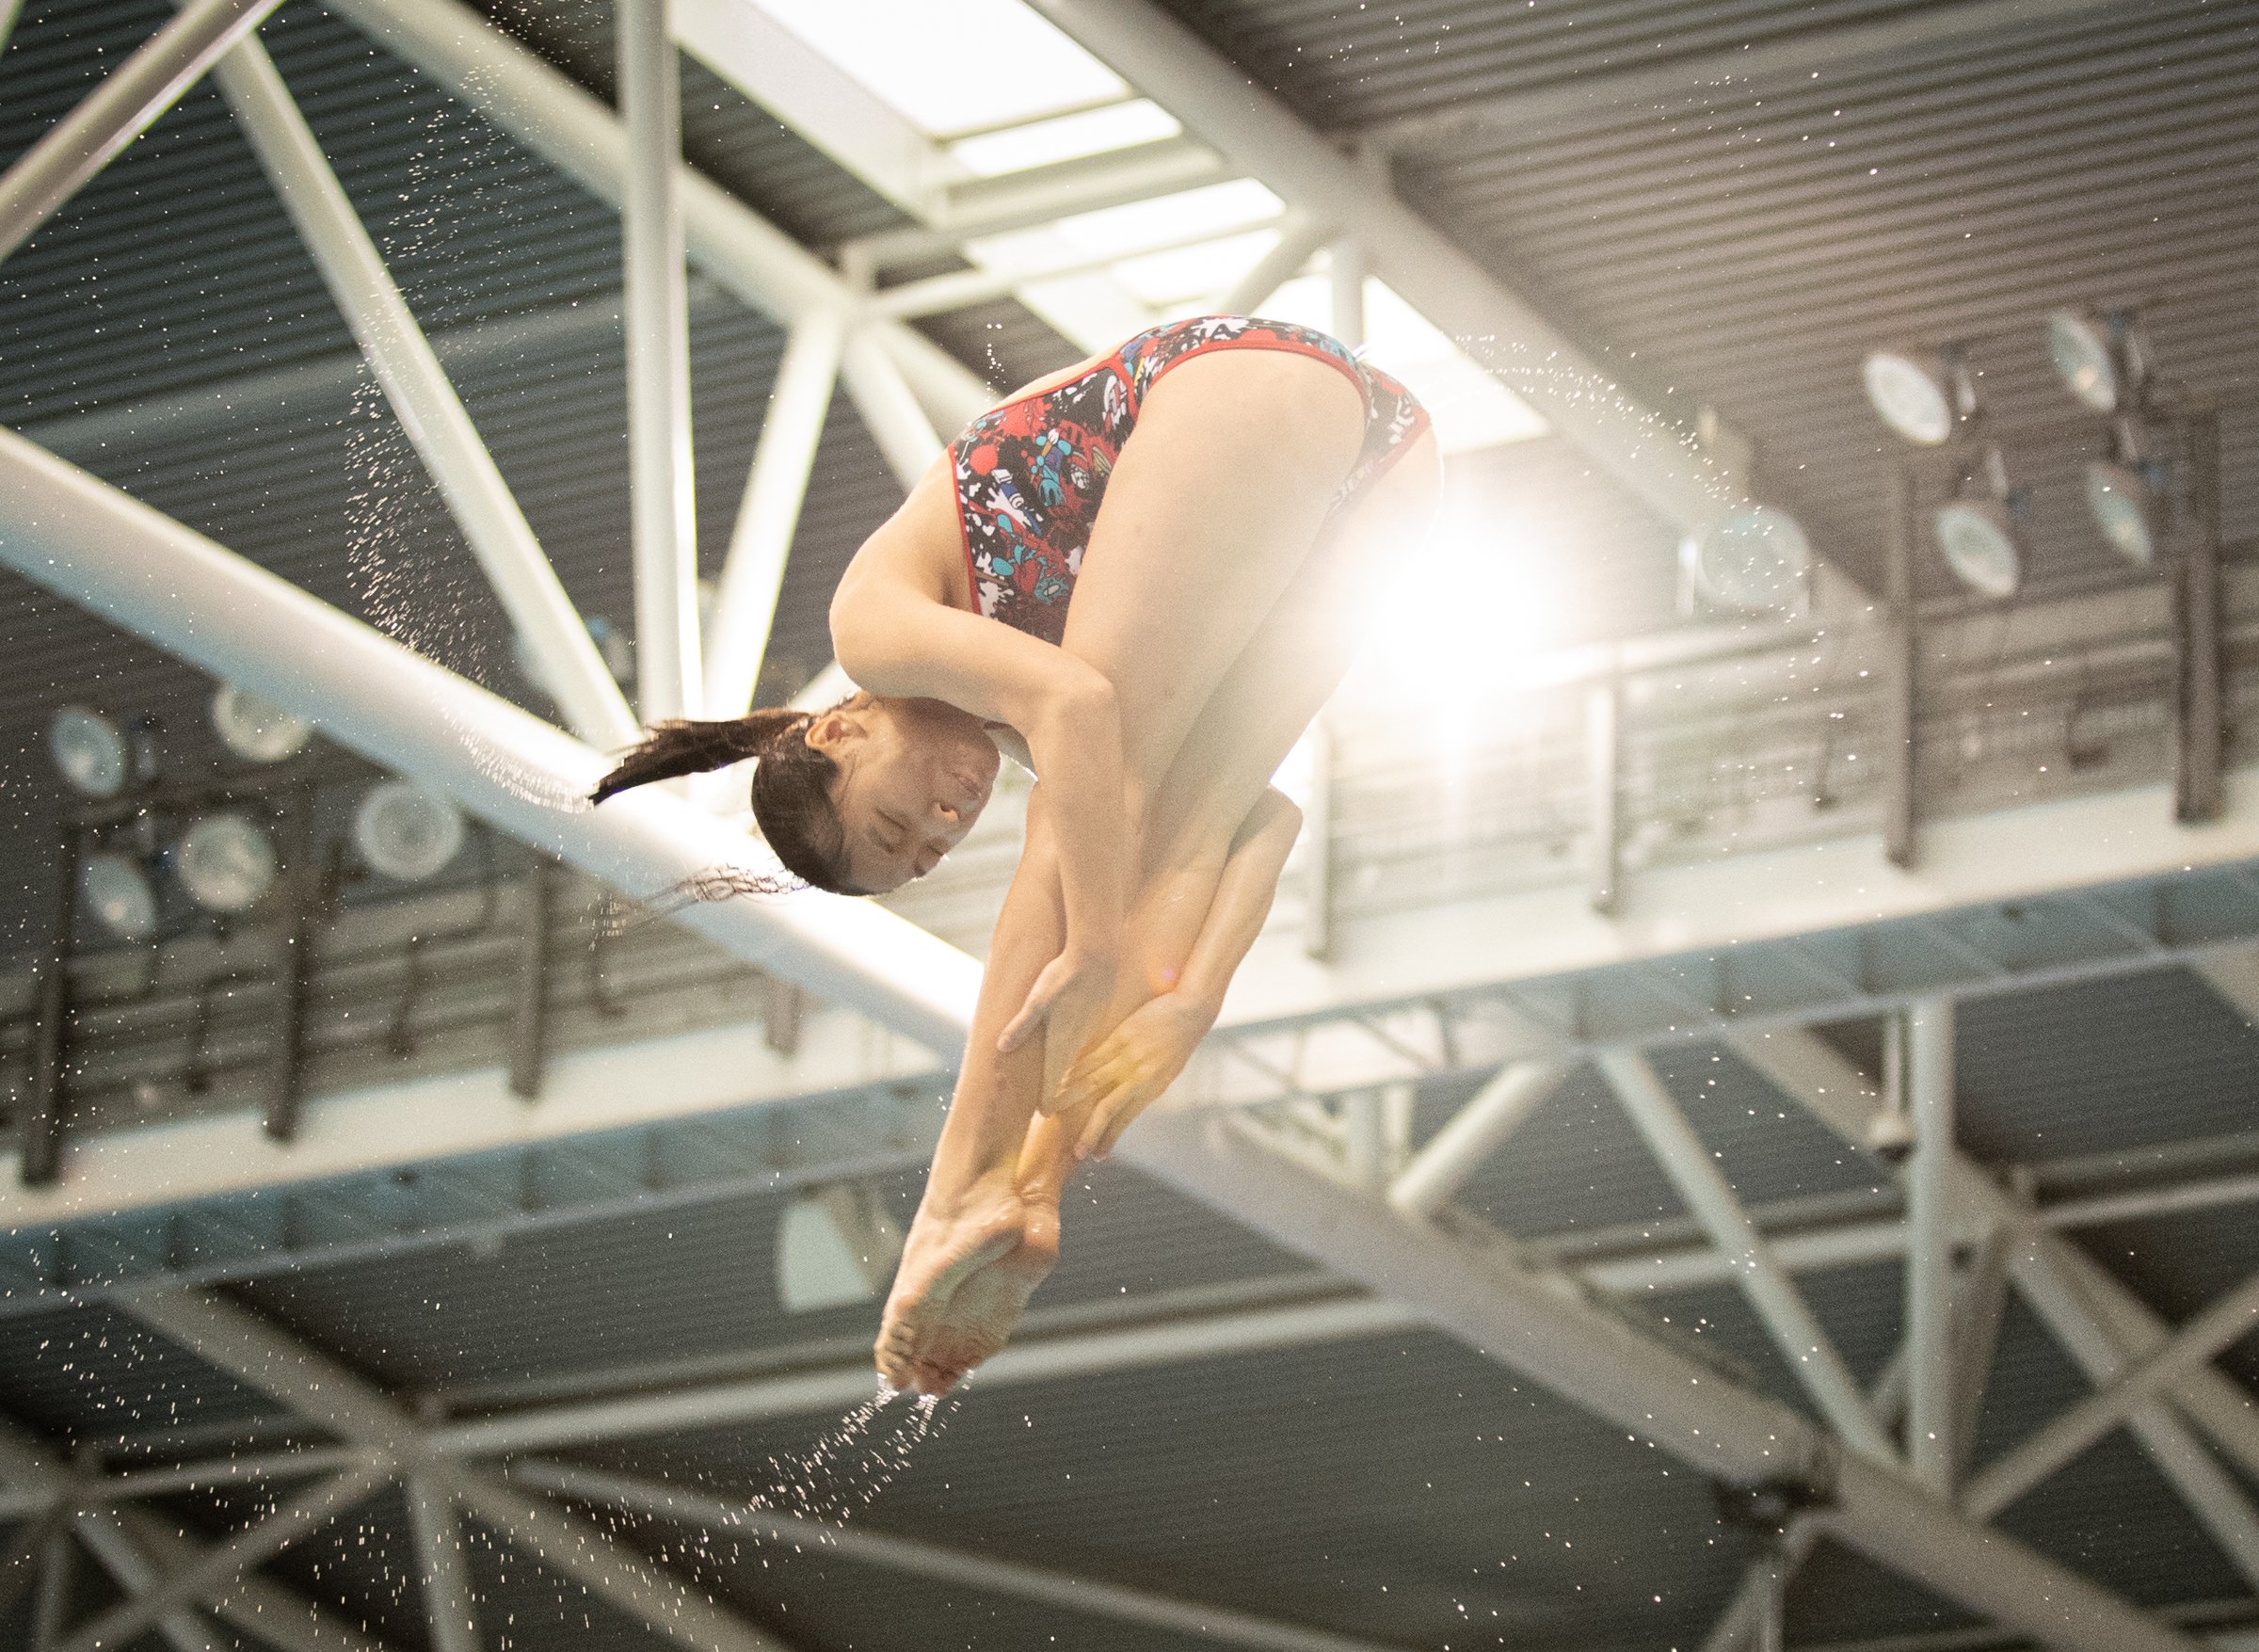 A Singaporean diver rotates in the air during the Singapore National Diving Championships at the OCBC Aquatic Centre.